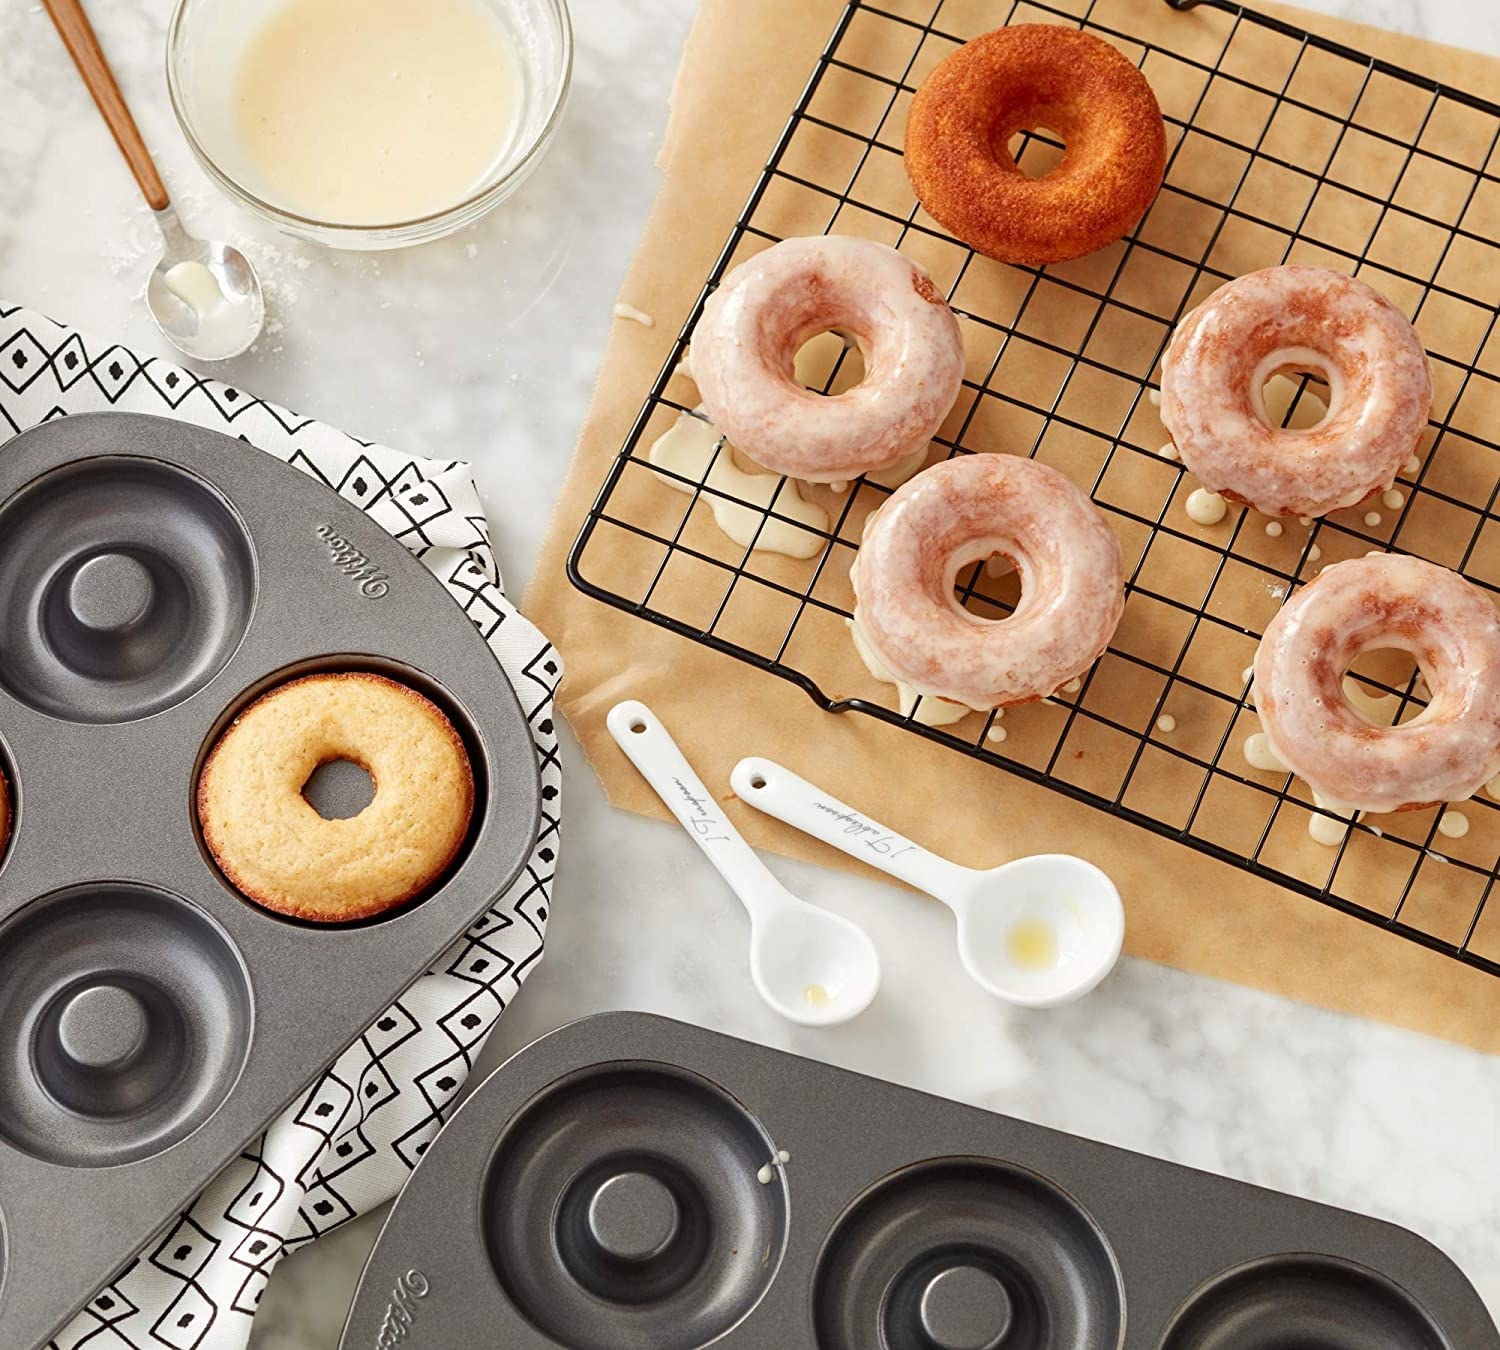 Two donut pans and a donuts on a cooling rack on a counter